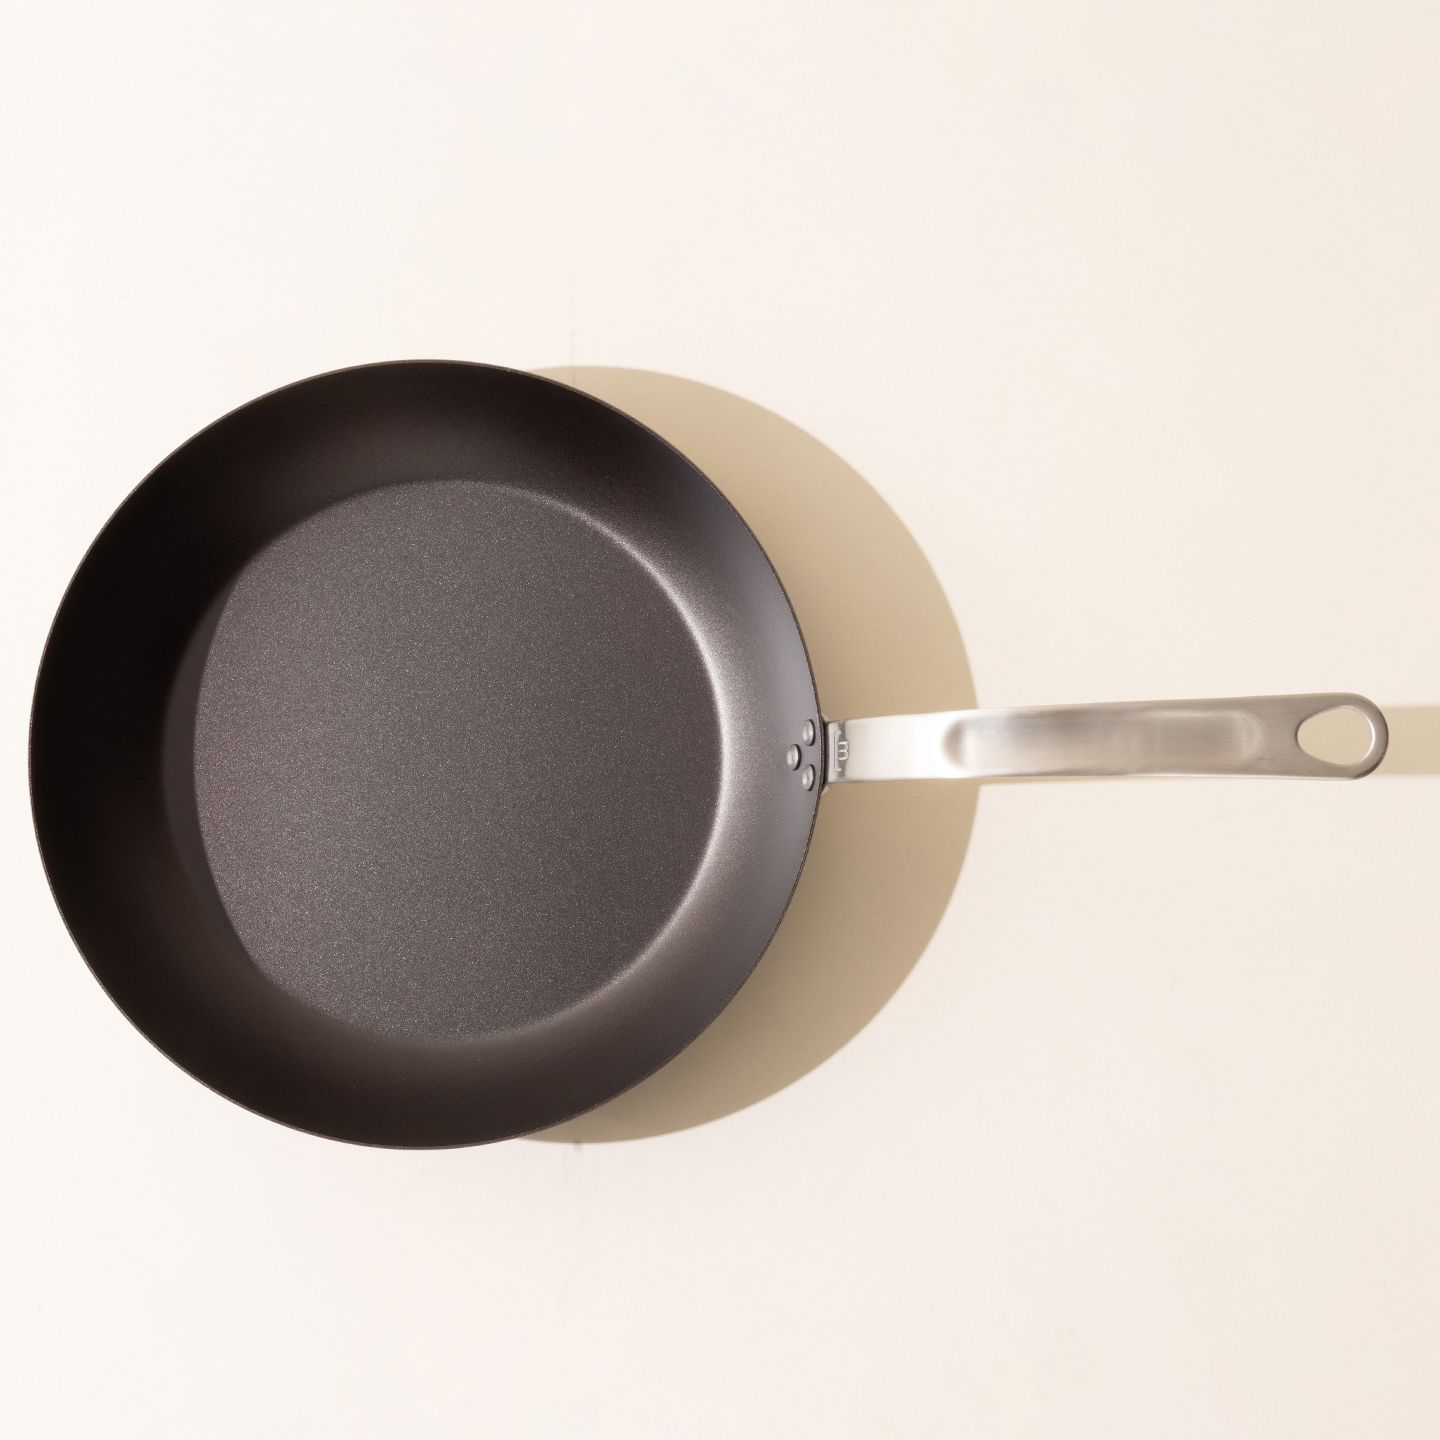 Best Carbon Steel Pan Made in USA – A List of US Brands